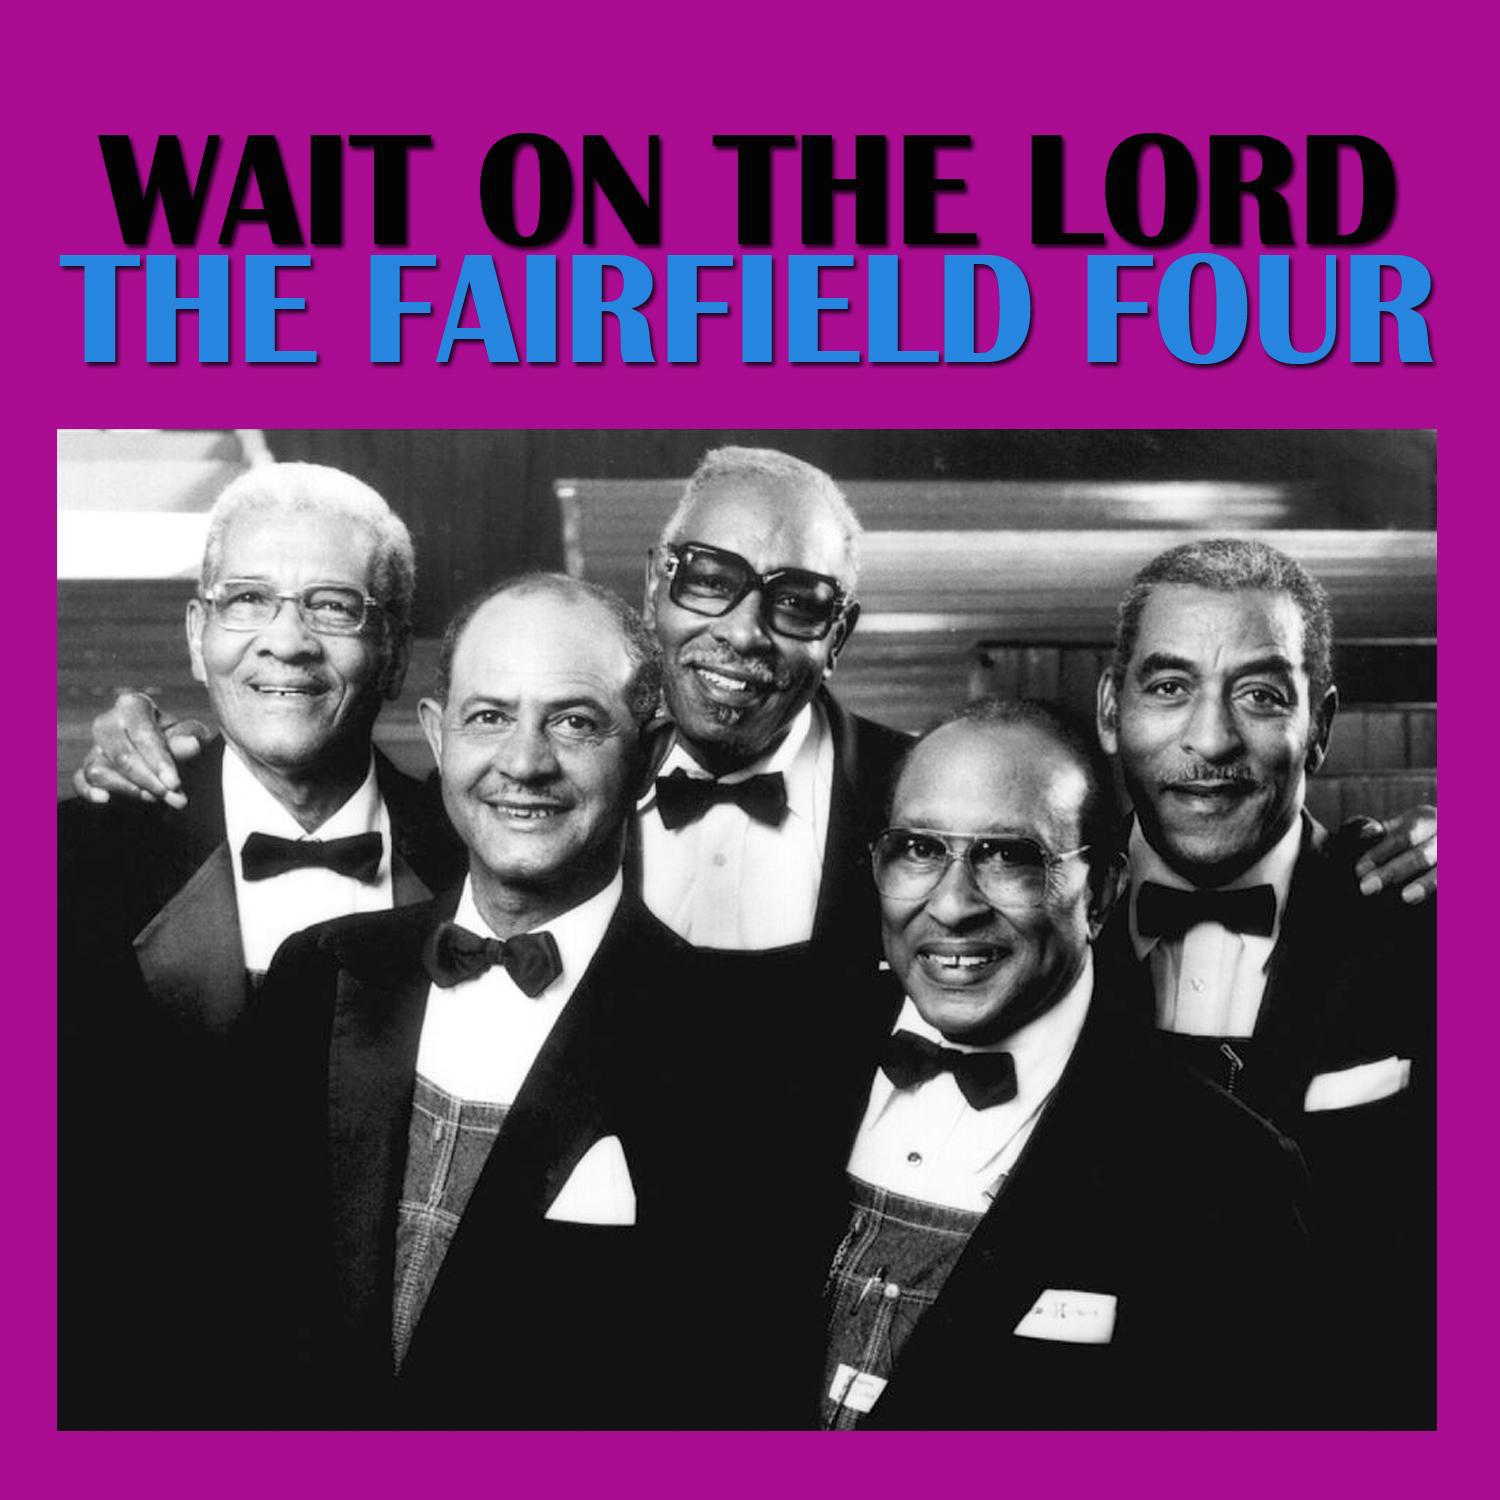 The Fairfield Four - What Are They Doing in Heaven Today